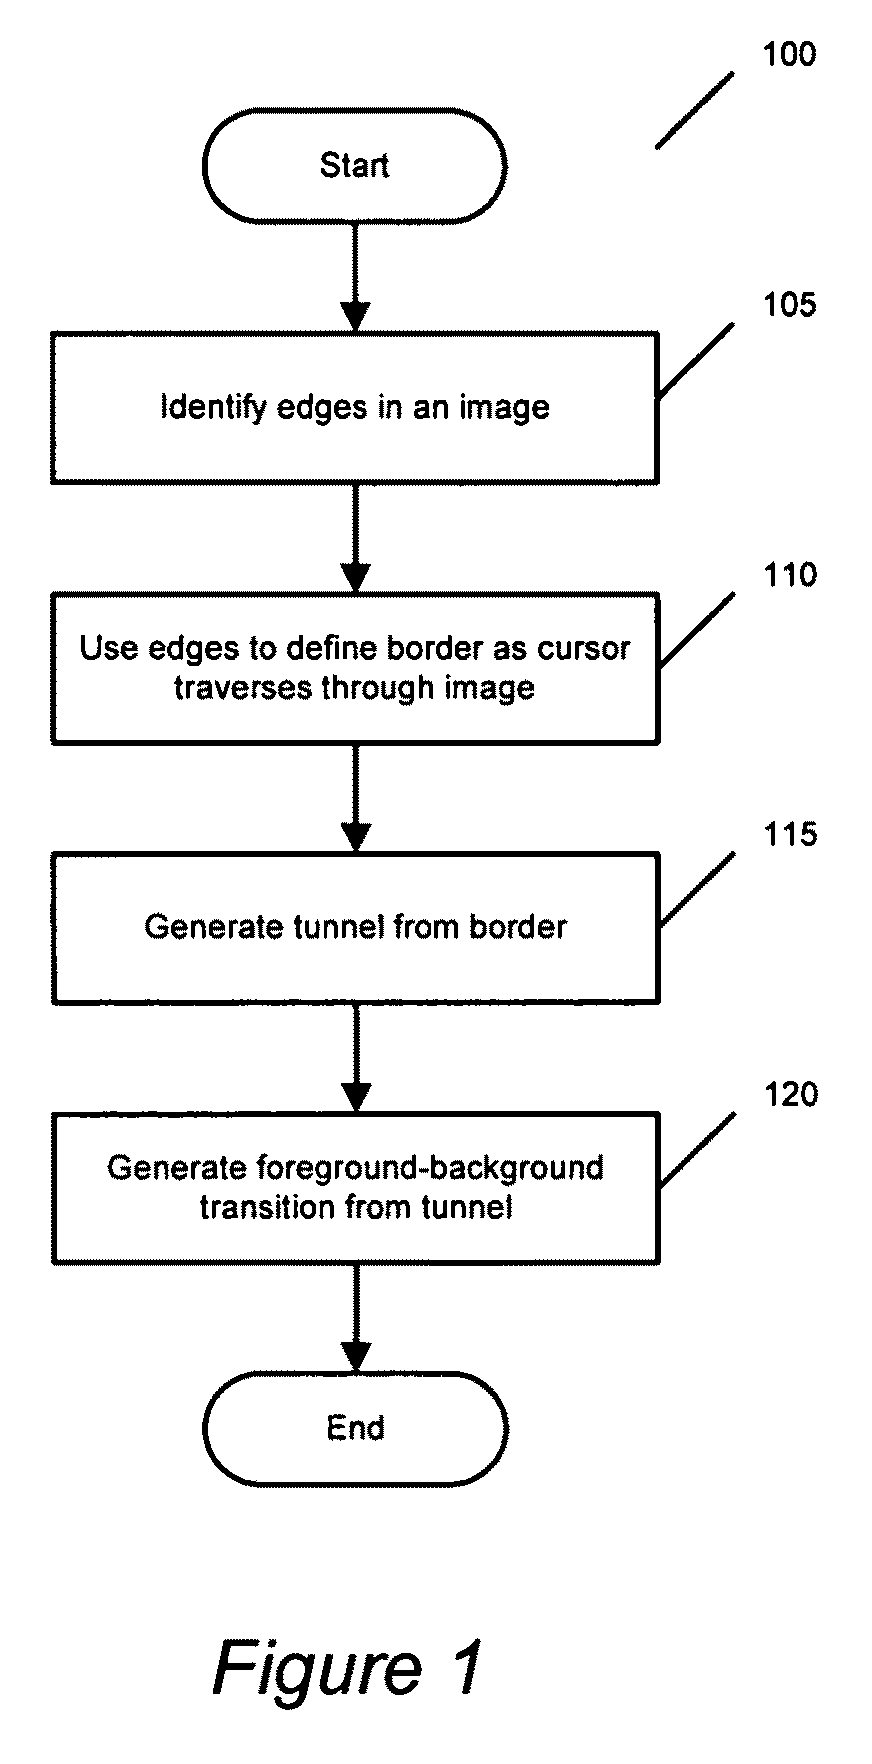 Defining a border for an image